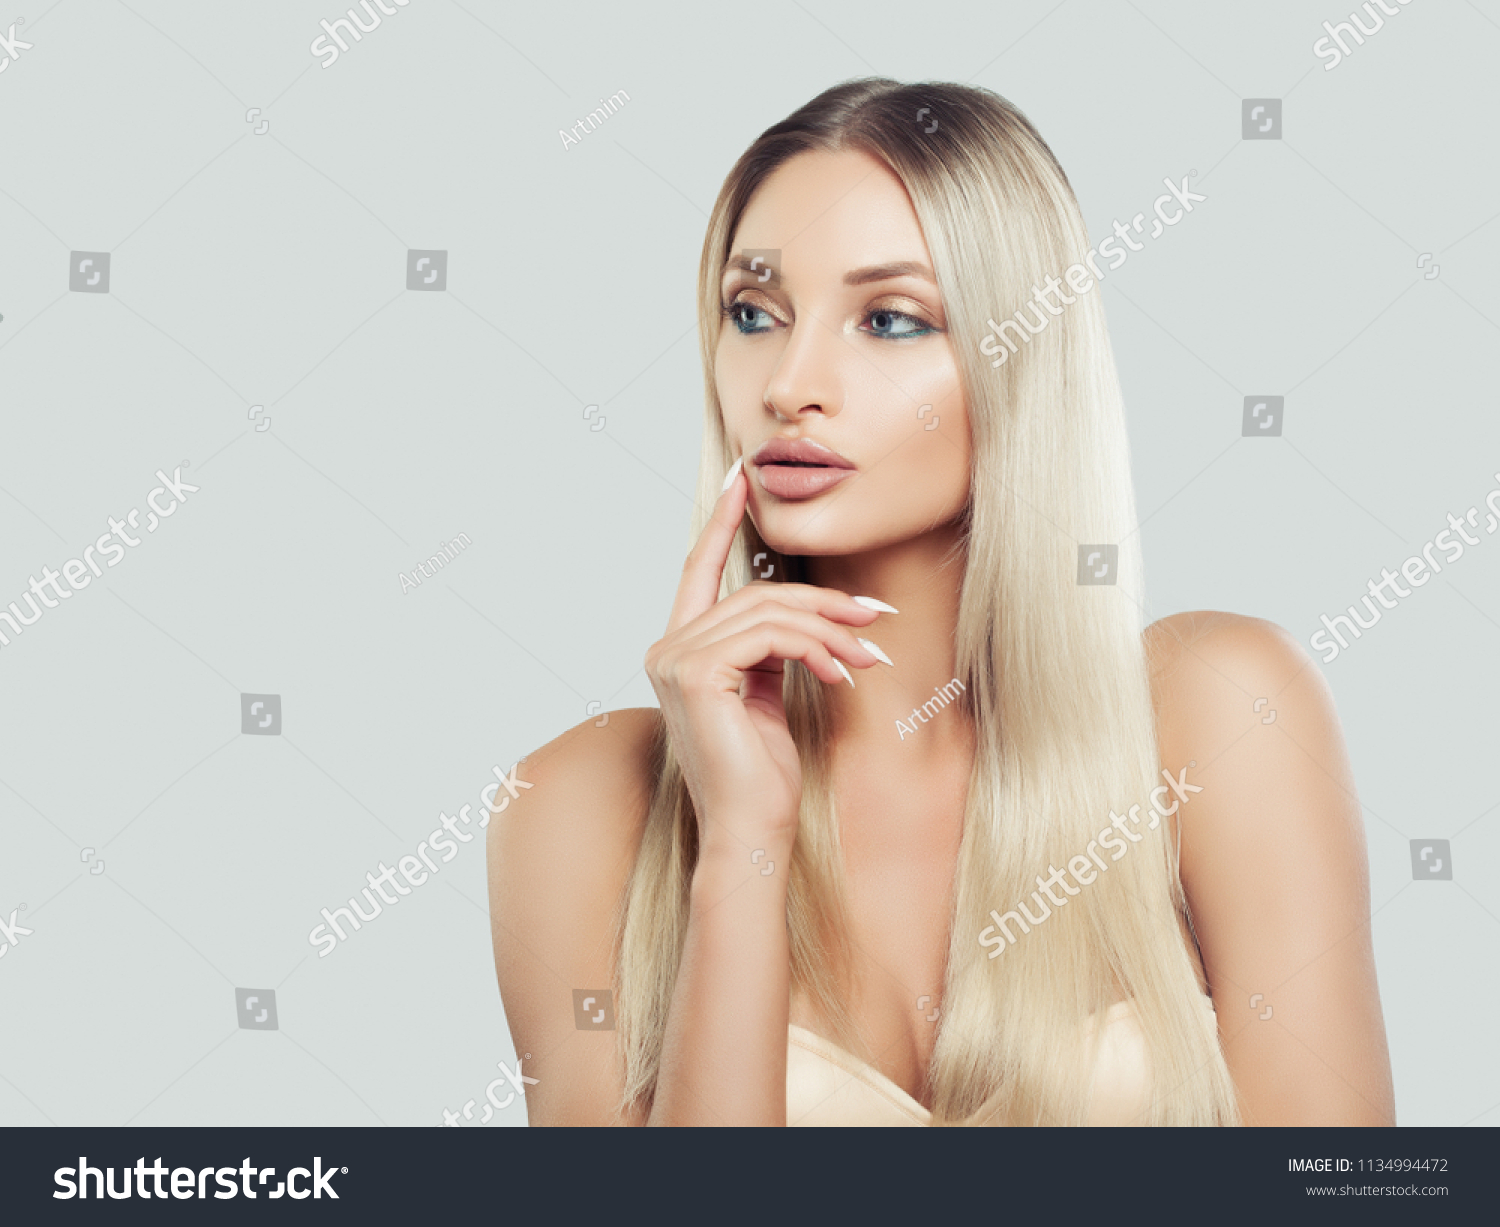 Thinking Woman with Clean Fresh Skin and Blonde Hair on Background with Copy space. Facial treatment. Cosmetology, beauty, skin care and spa #1134994472